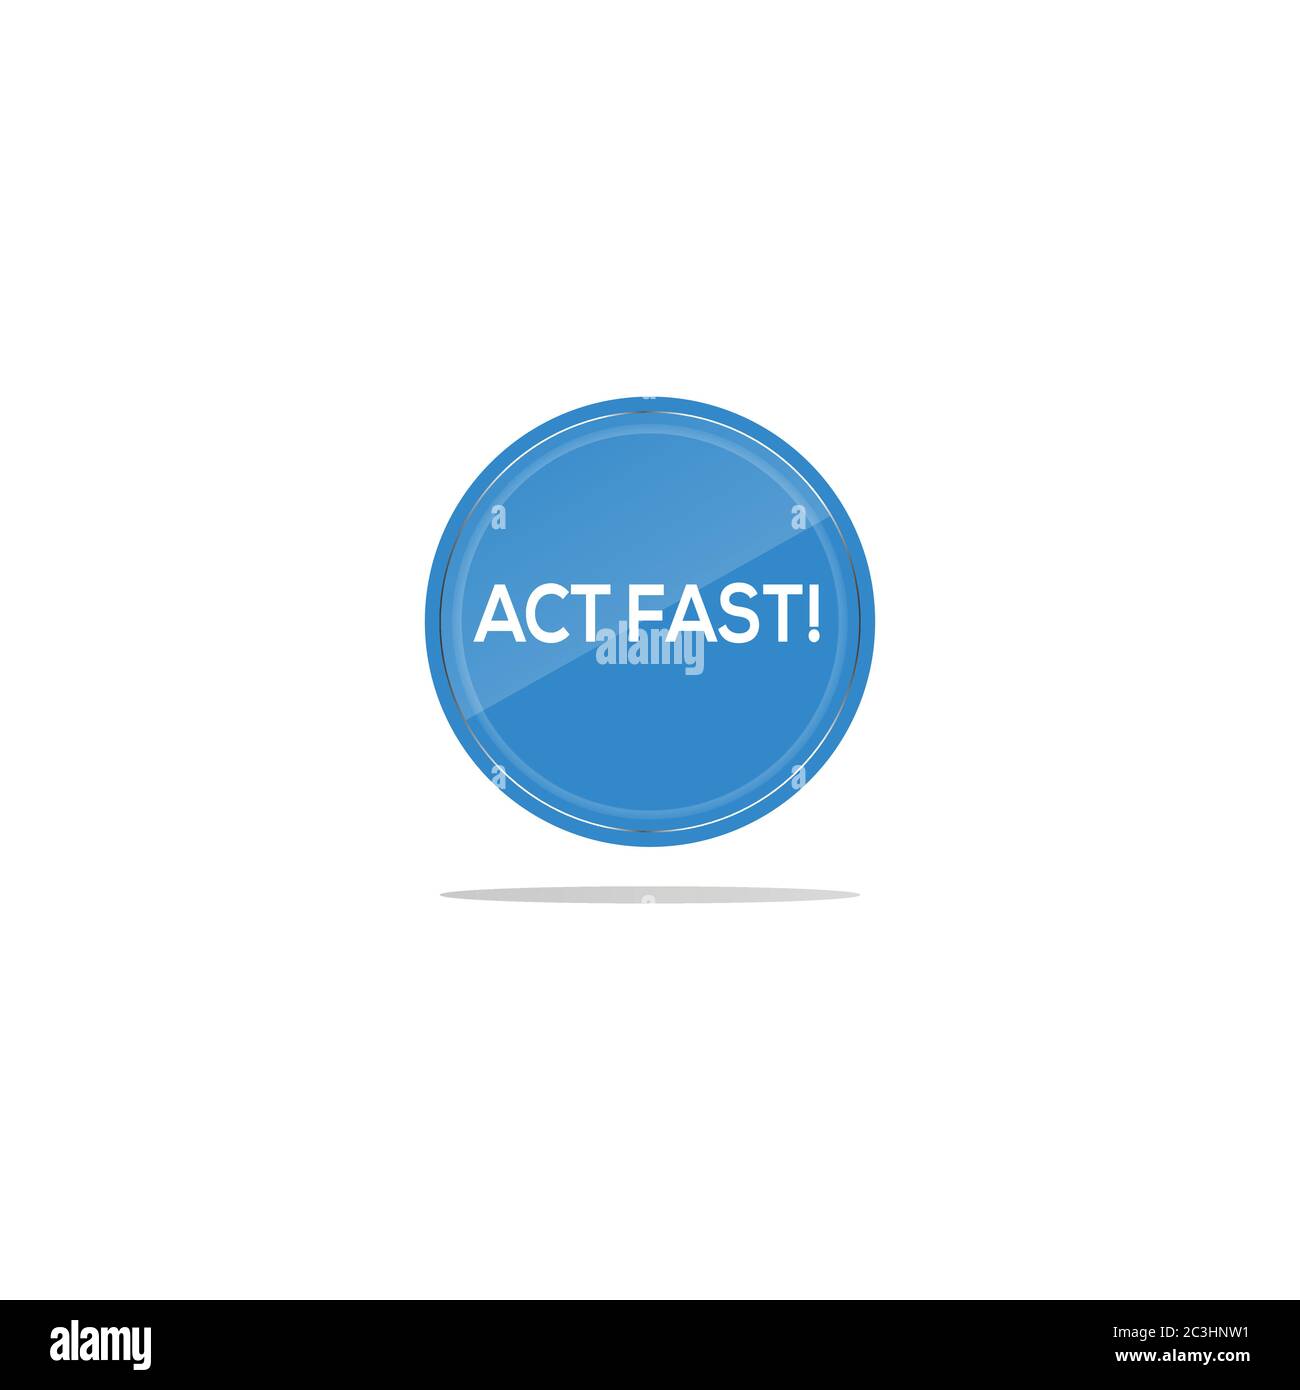 Writing act fast in a blue circle. There is a circular glass in front of the act fast article. Stock Vector